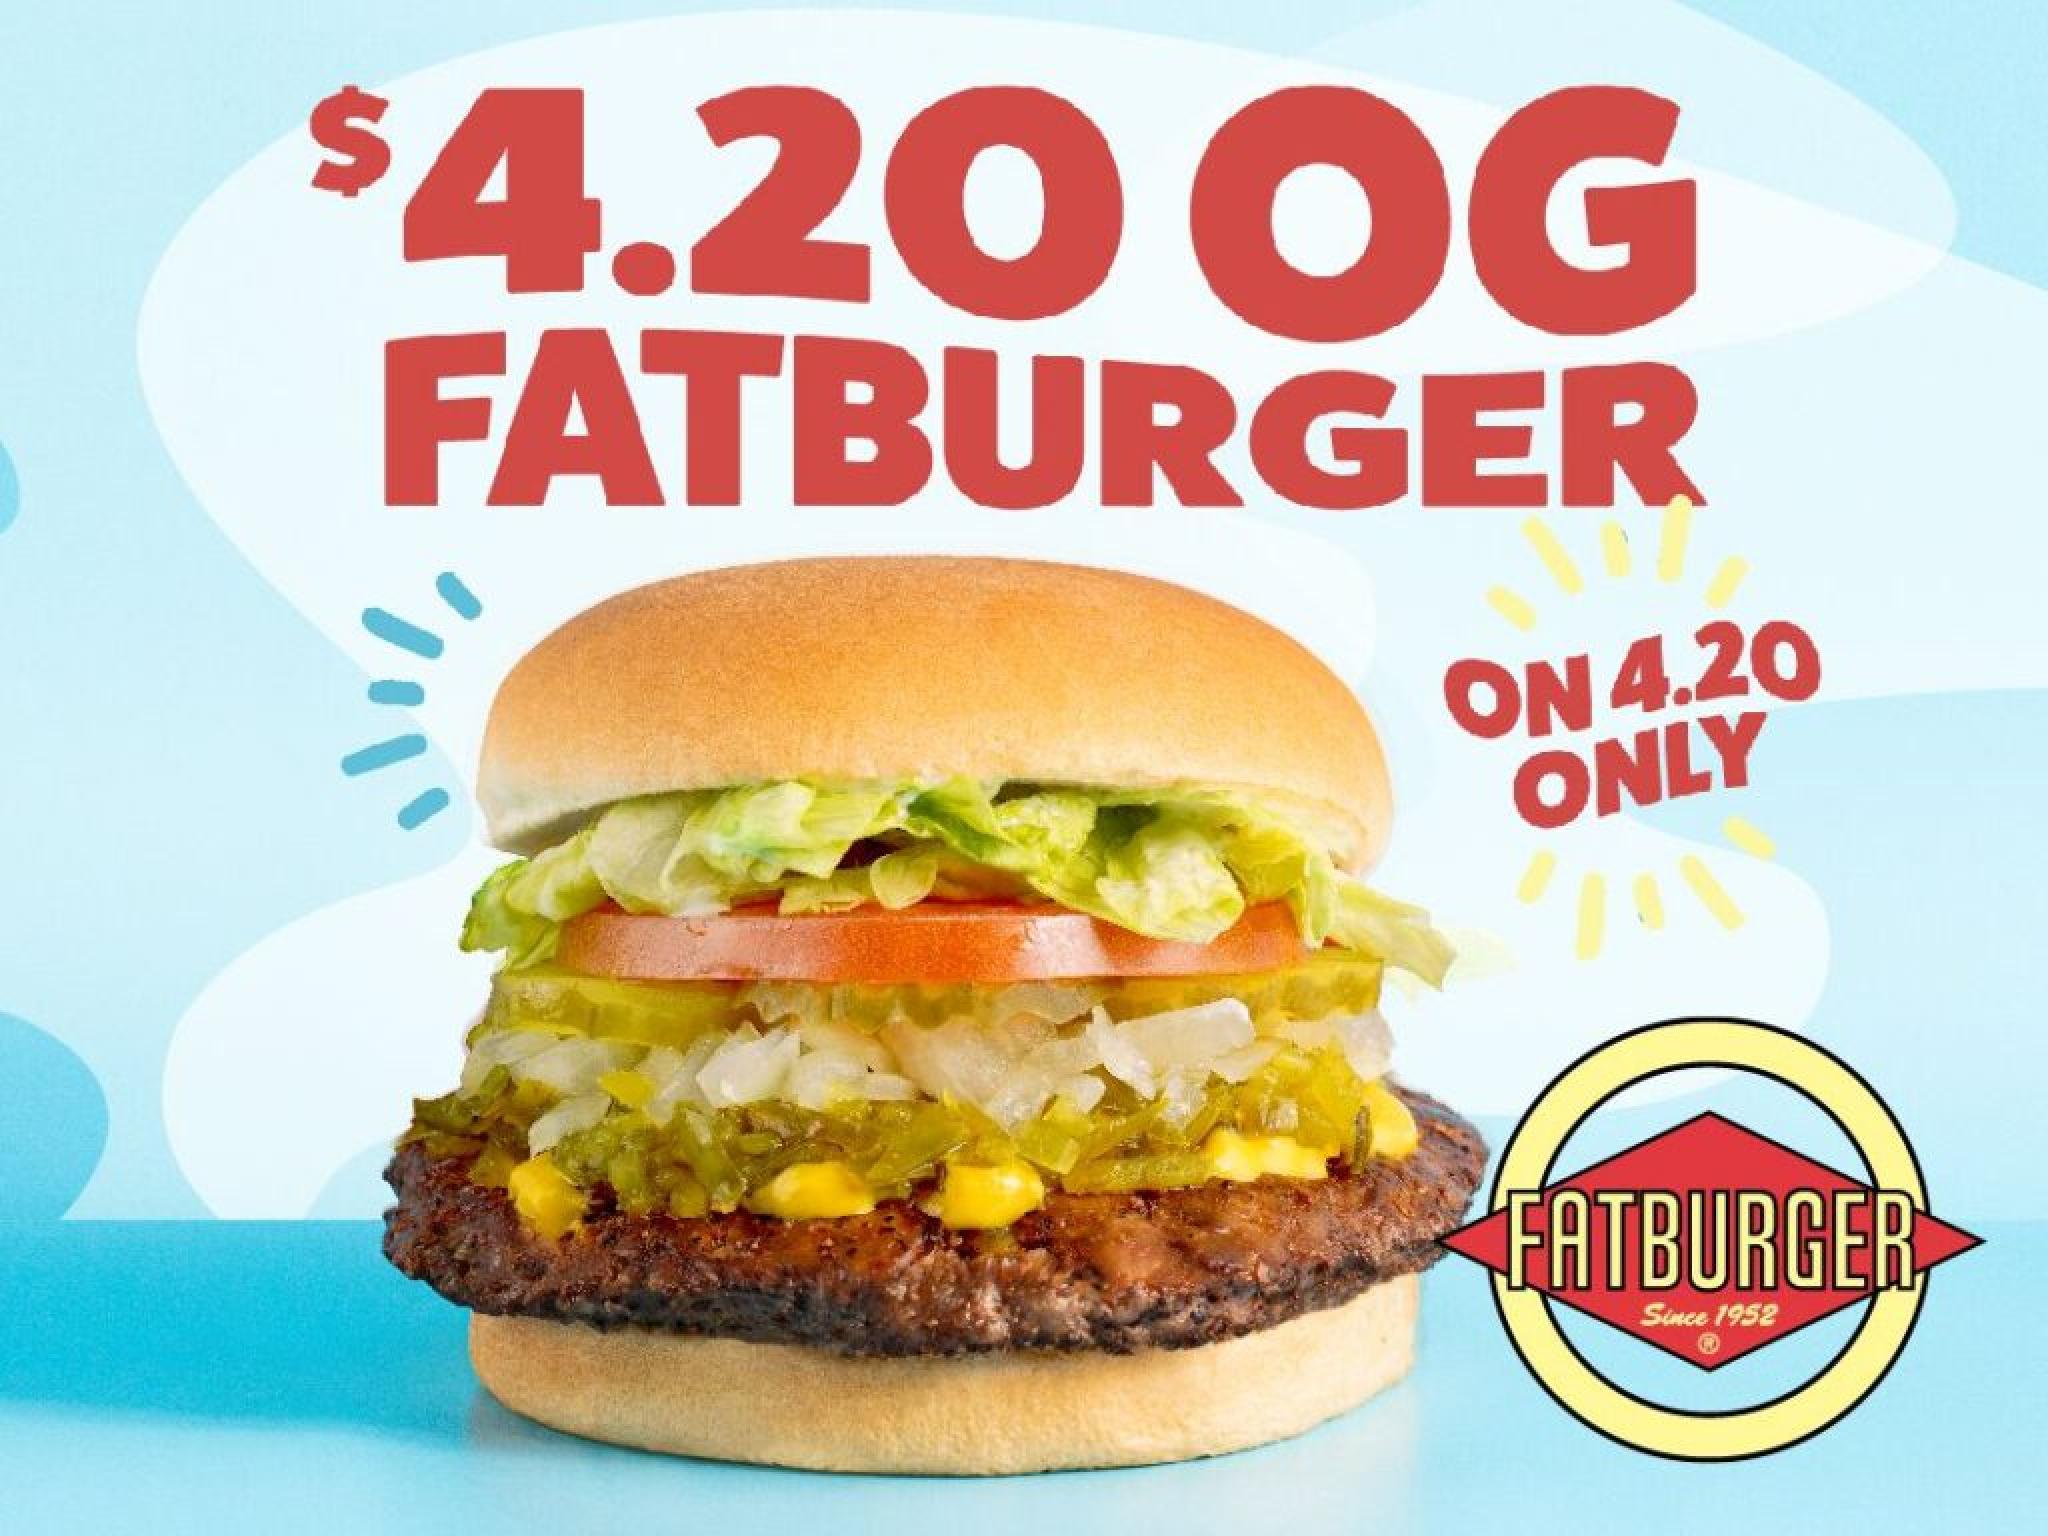  after-thc-infused-ketchup-success-fatburger-celebrates-420-with-new-special-offering 